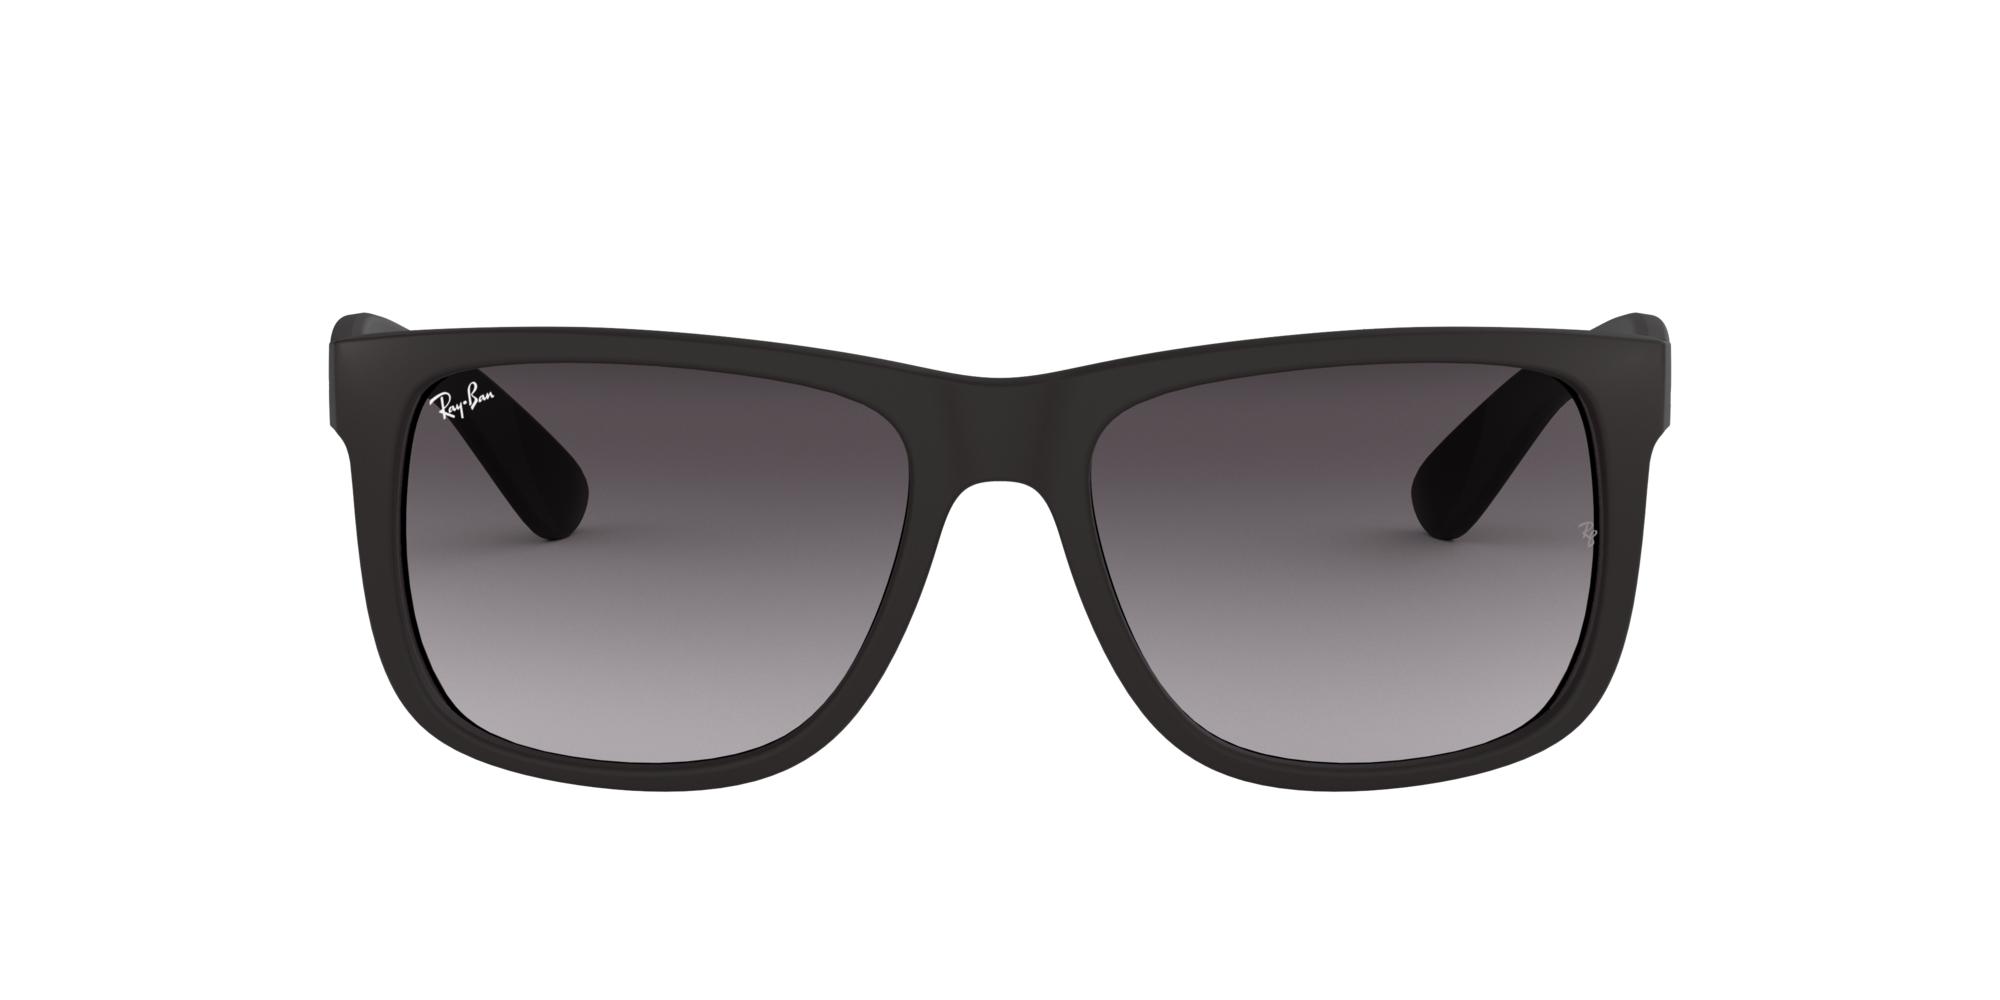 Ray-Ban 0RB4165 in Matte Black 